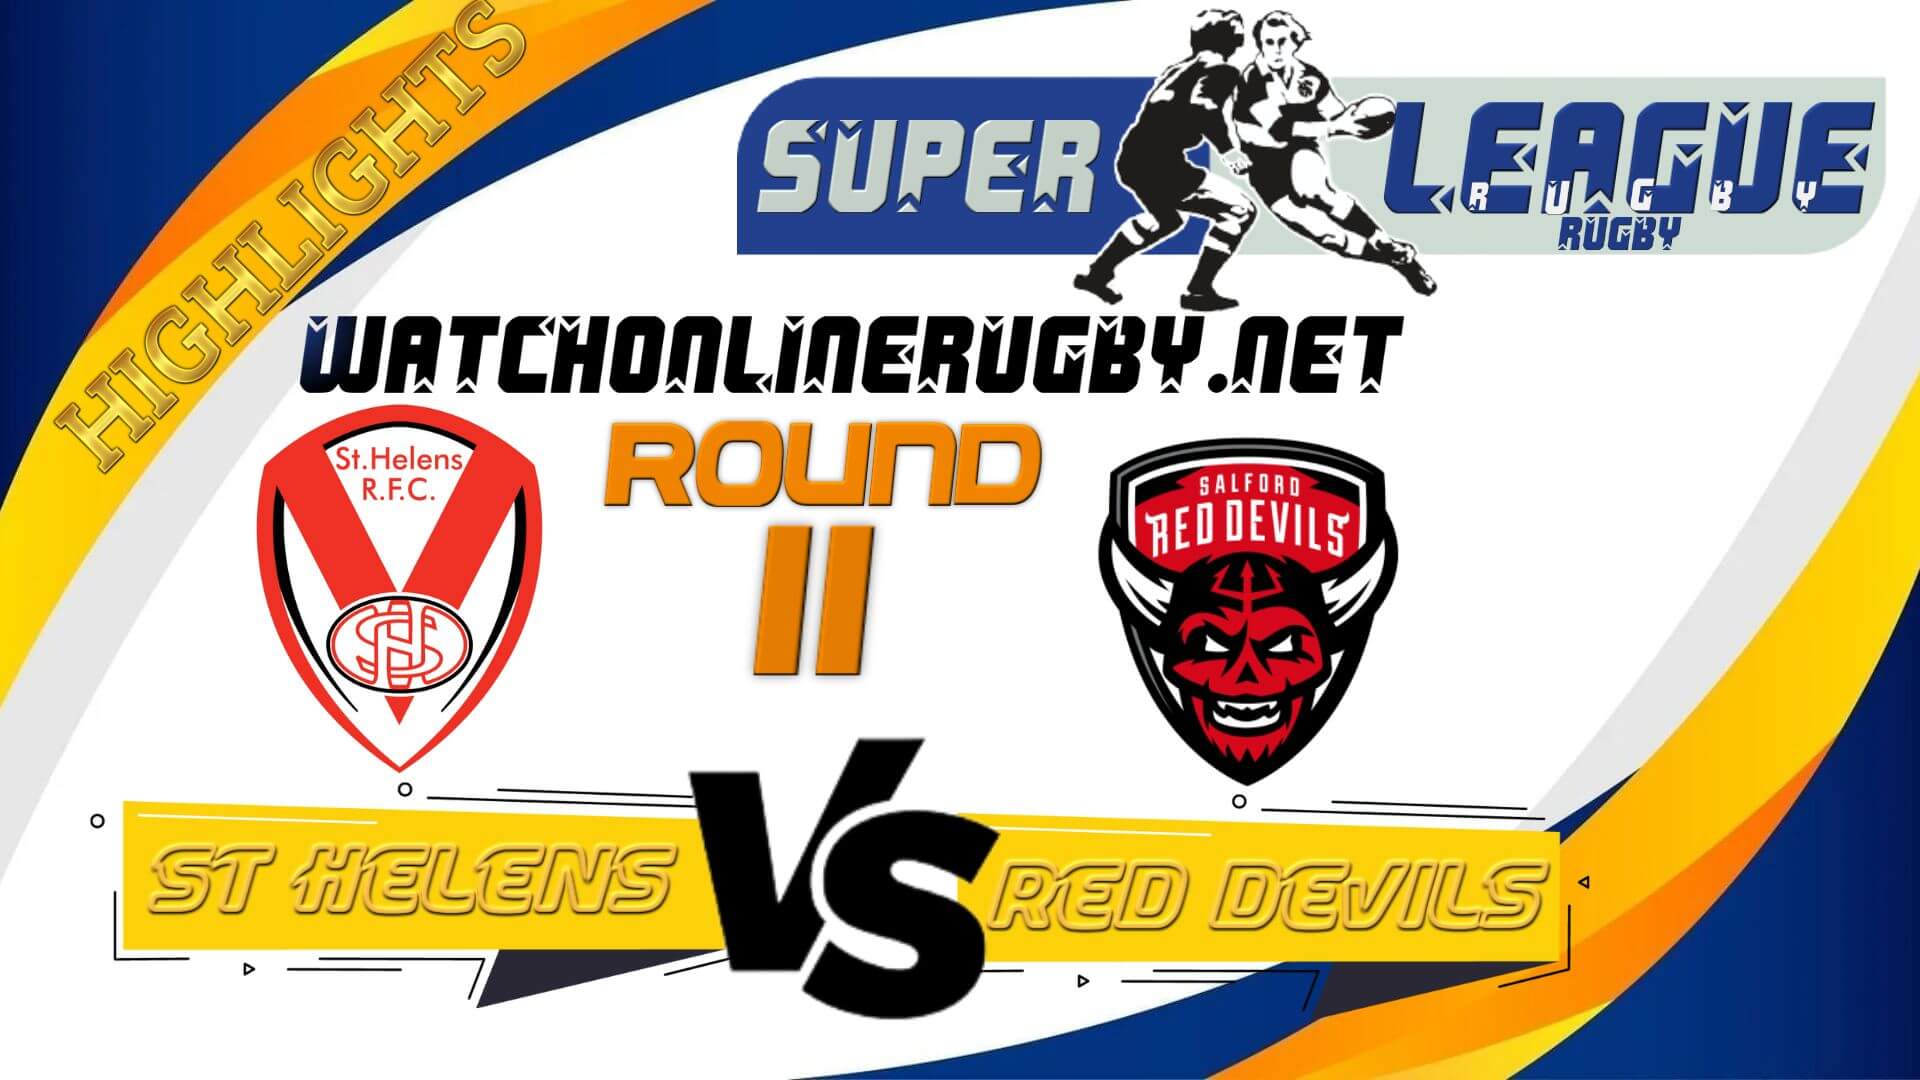 St Helens Vs Salford Red Devils Super League Rugby 2022 RD 11